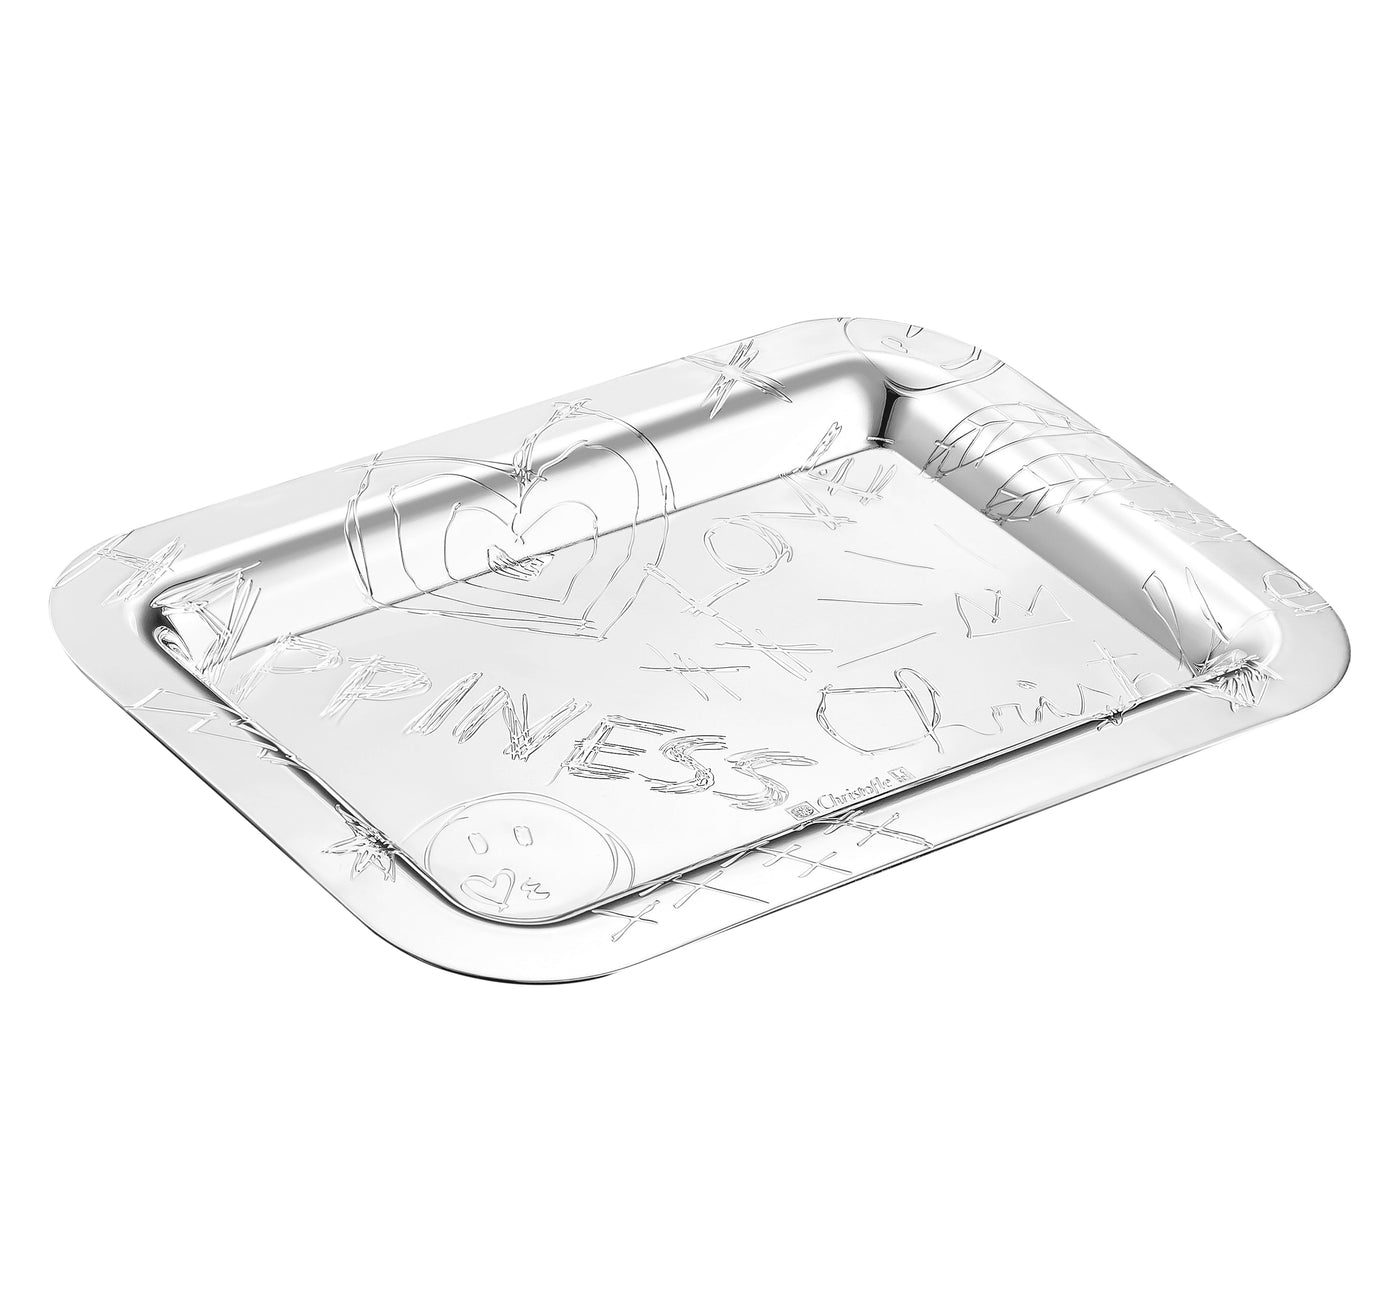 Graffiti Tray from Christophle